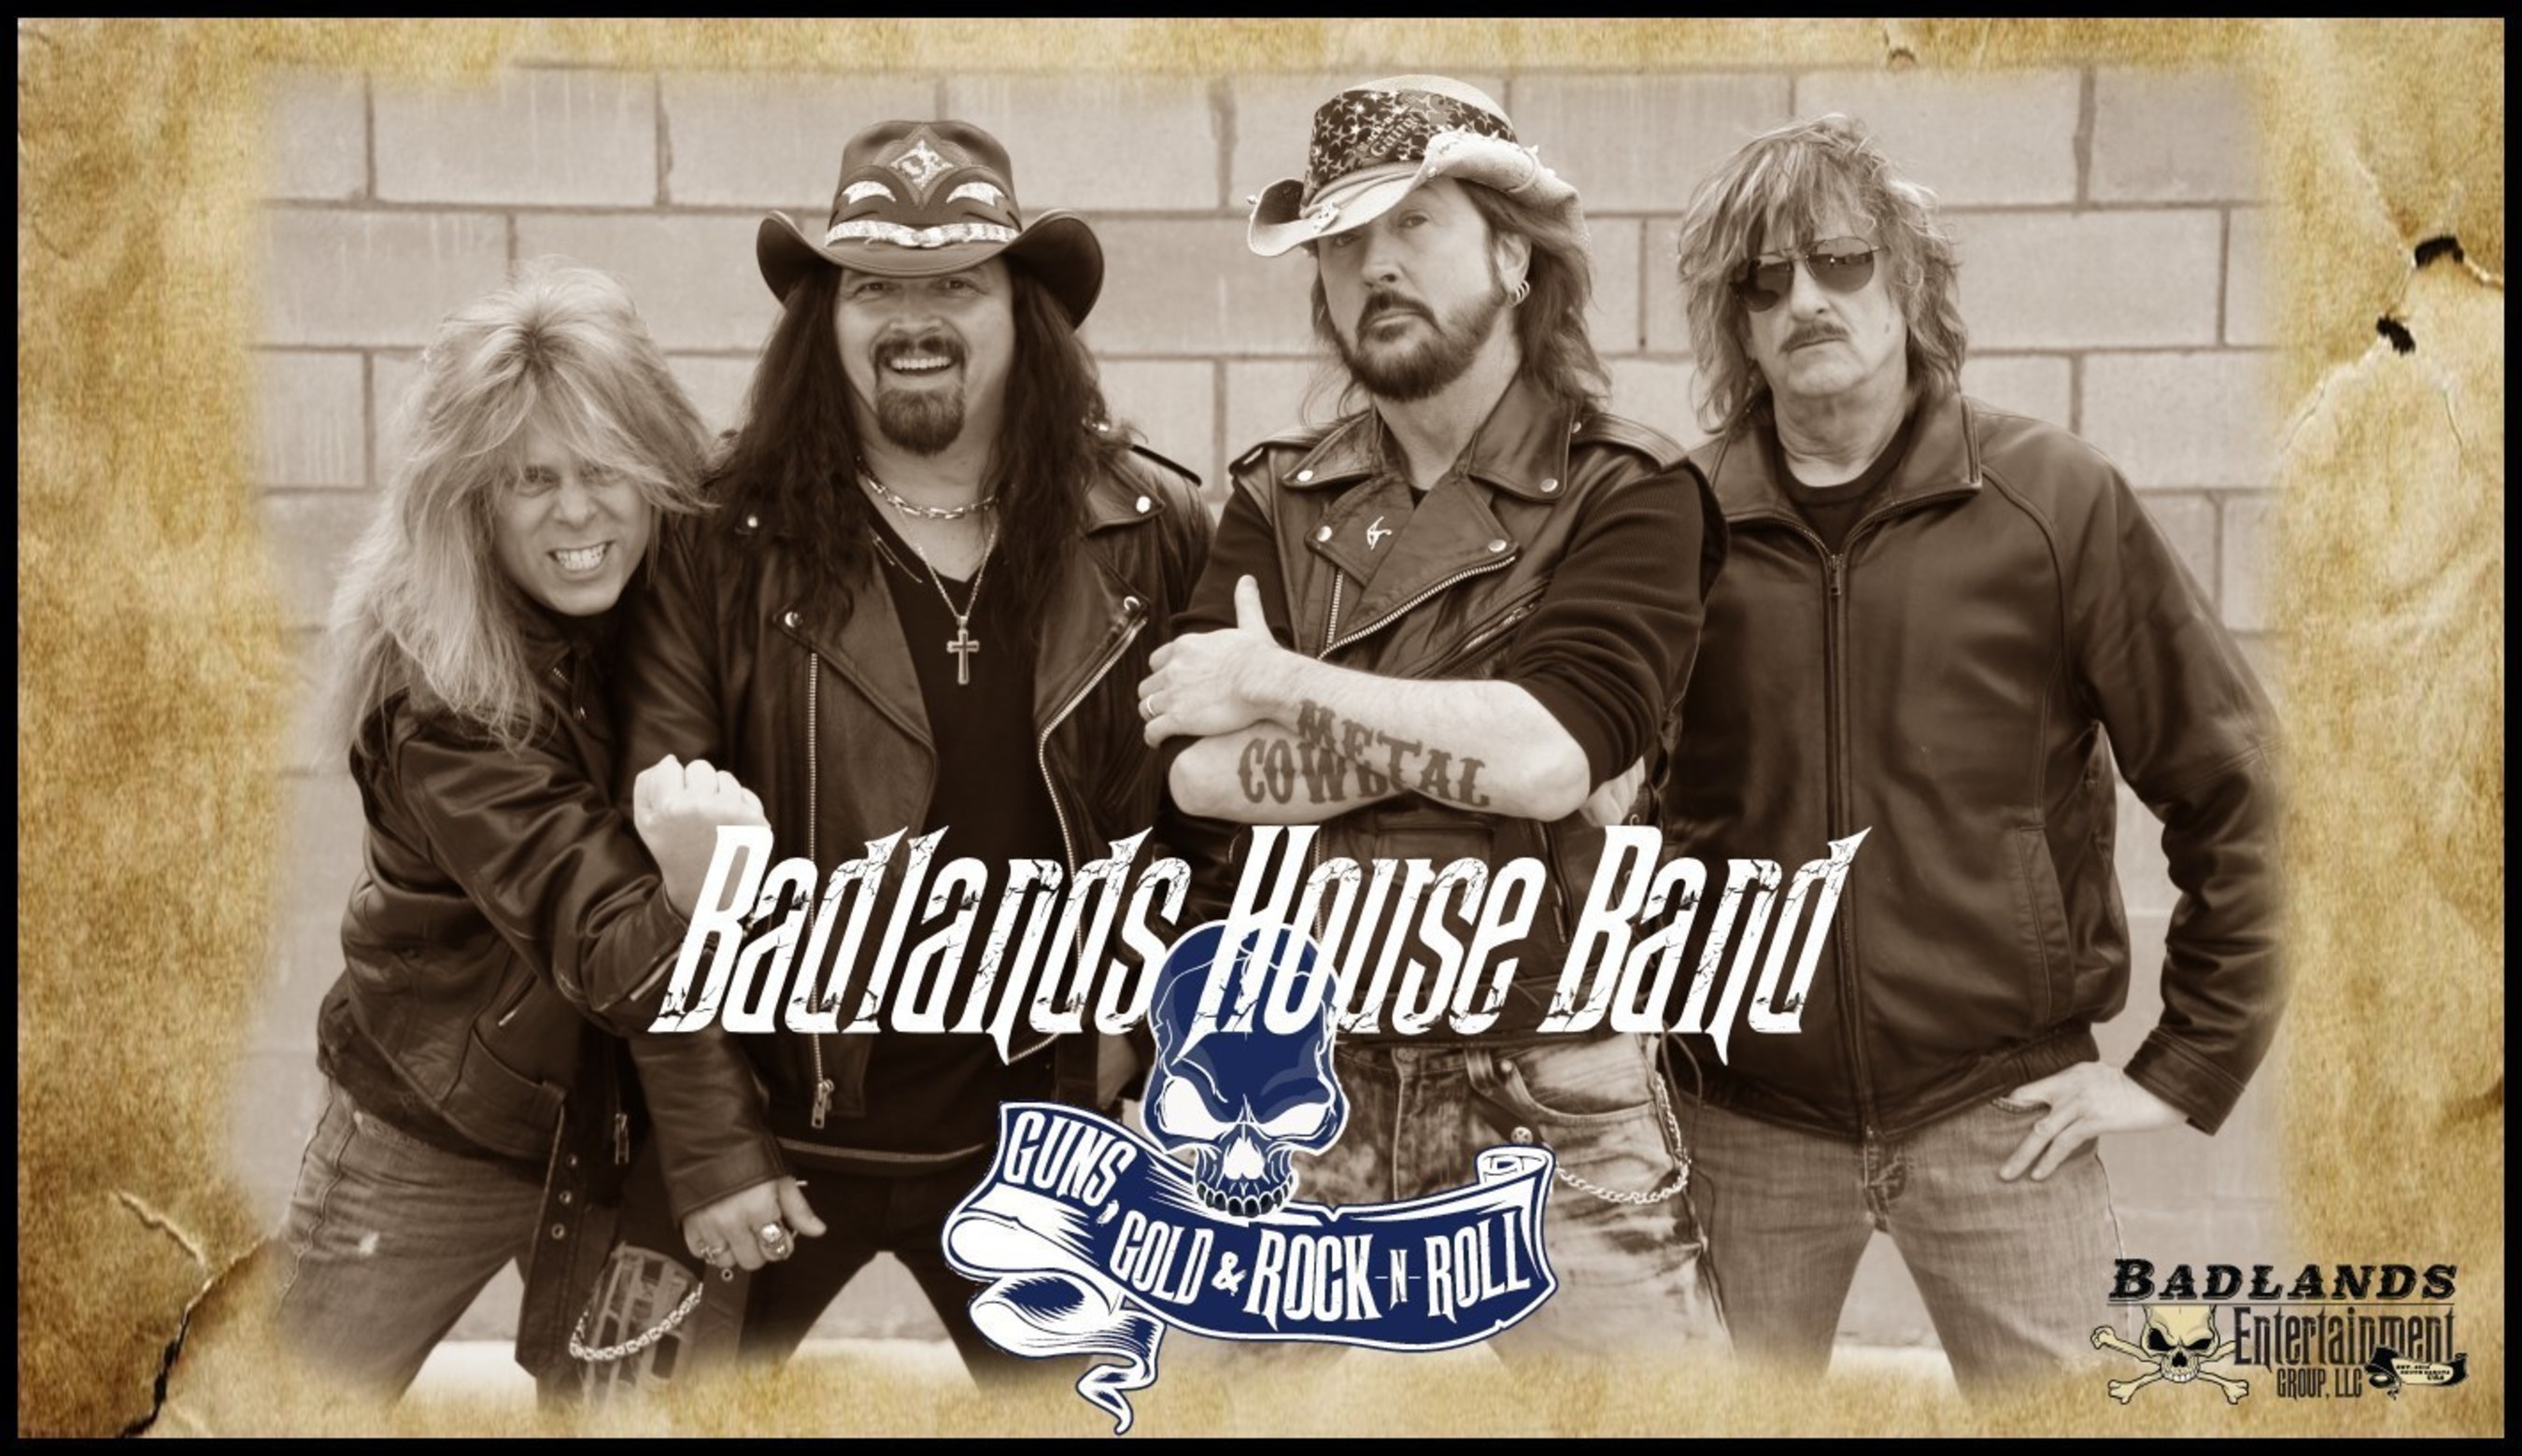 Badlands Entertainment Group appoints musicians to round out the band that will tour throughout the Midwest and perform with major acts at Badlands Pawn, Gold & Jewelry in Sioux Falls, SD. From left: lead guitarist David Cothern, bassist Geno Arce, bandleader Ron Keel and drummer Jeff Koller.